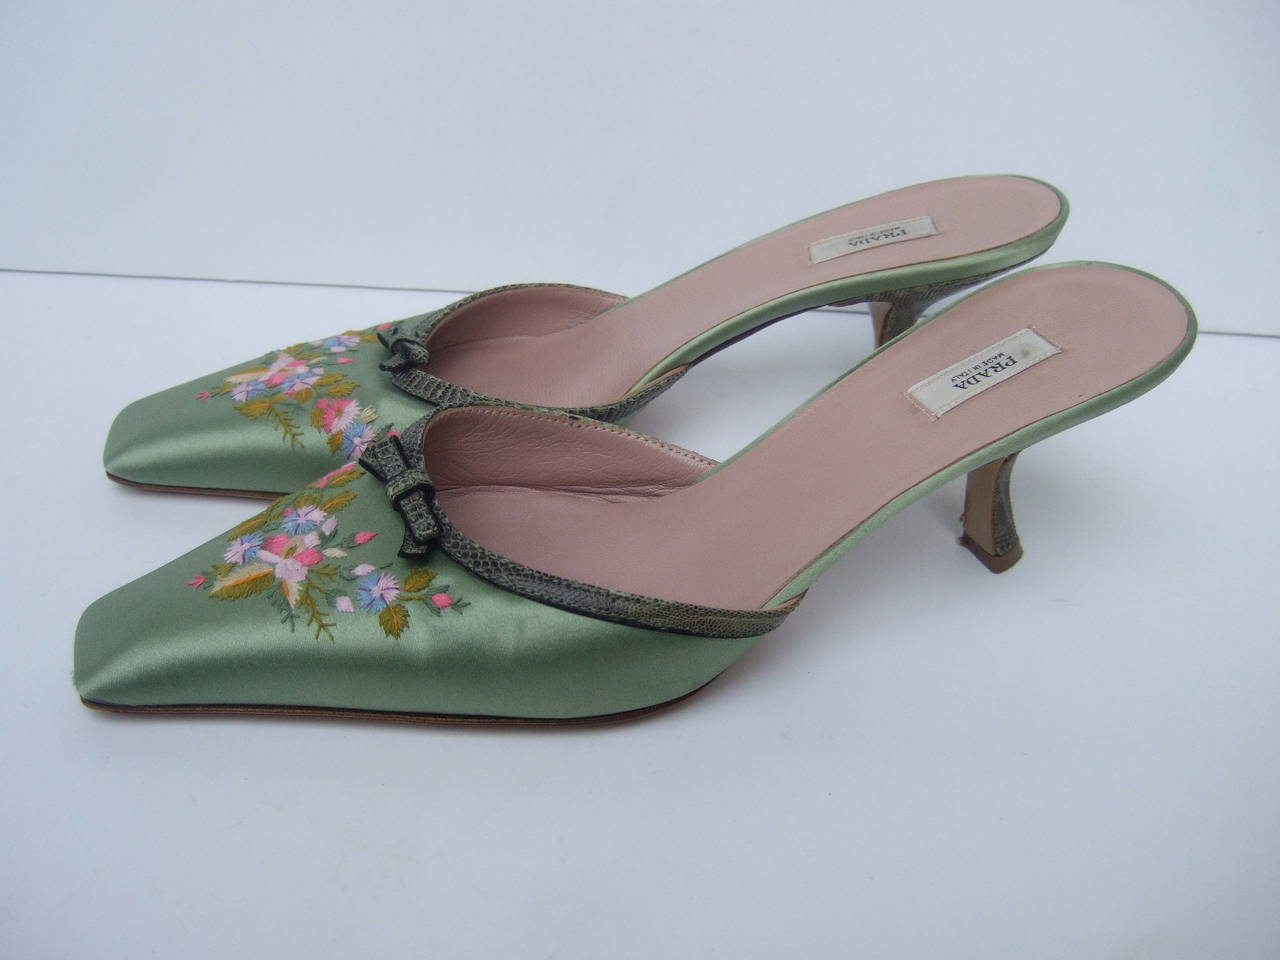 Prada Mint green satin embroidered flower mules. Made in Italy Size 37.5
The stylish designer mules are accented with a bouquet of lavender 
embroidered flowers

The front of the shoes are trimmed with green embossed leather & bows
The heels